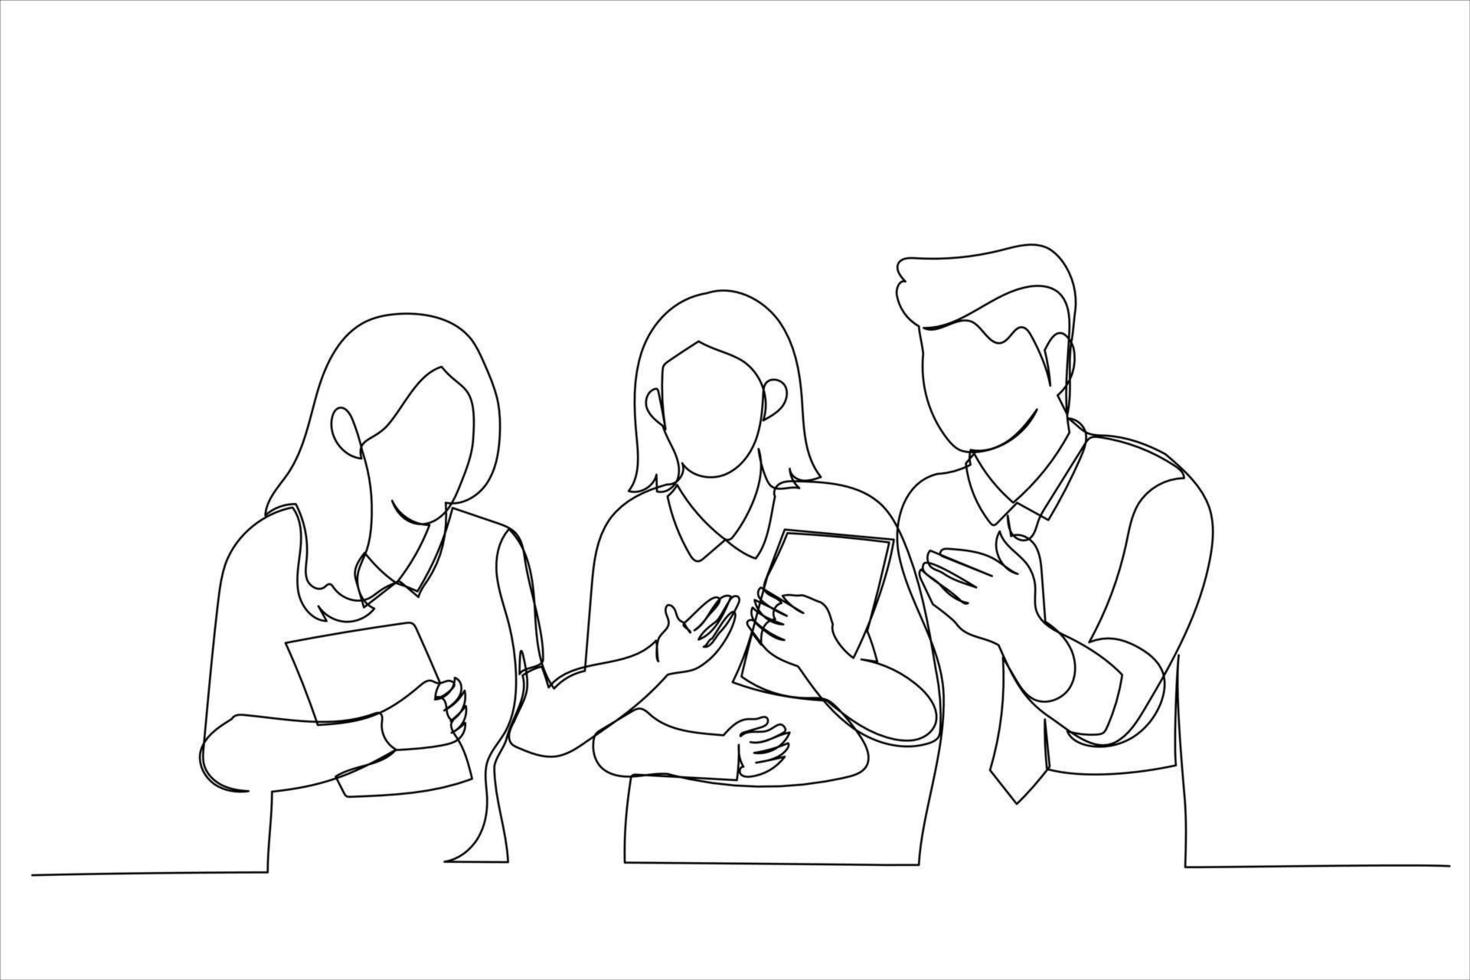 Illustration of designer communicating with orderers standing in coworking space. One line style art vector